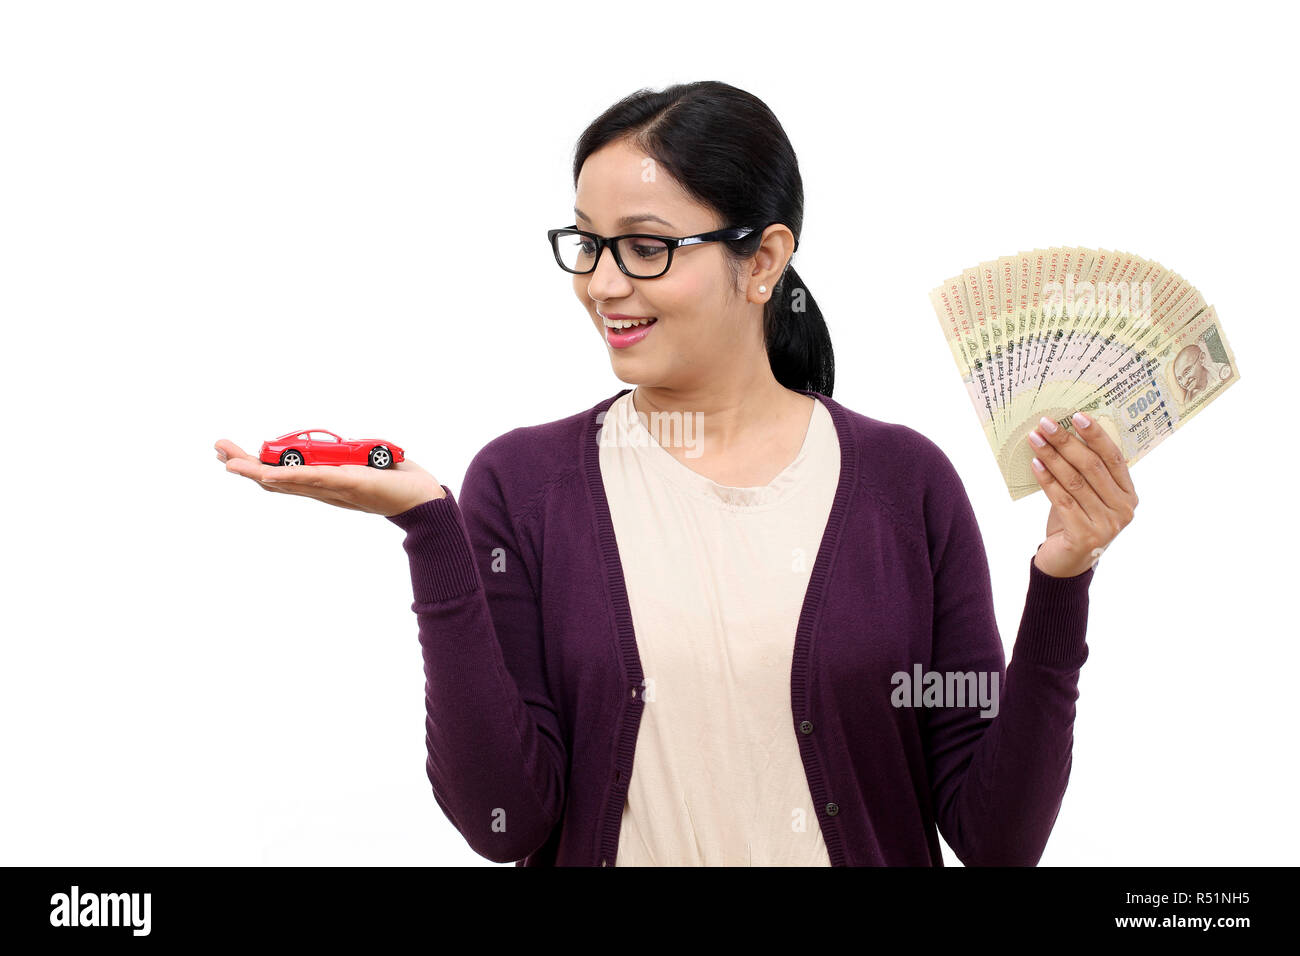 Young woman holding a toy car and Indian rupee notes Stock Photo